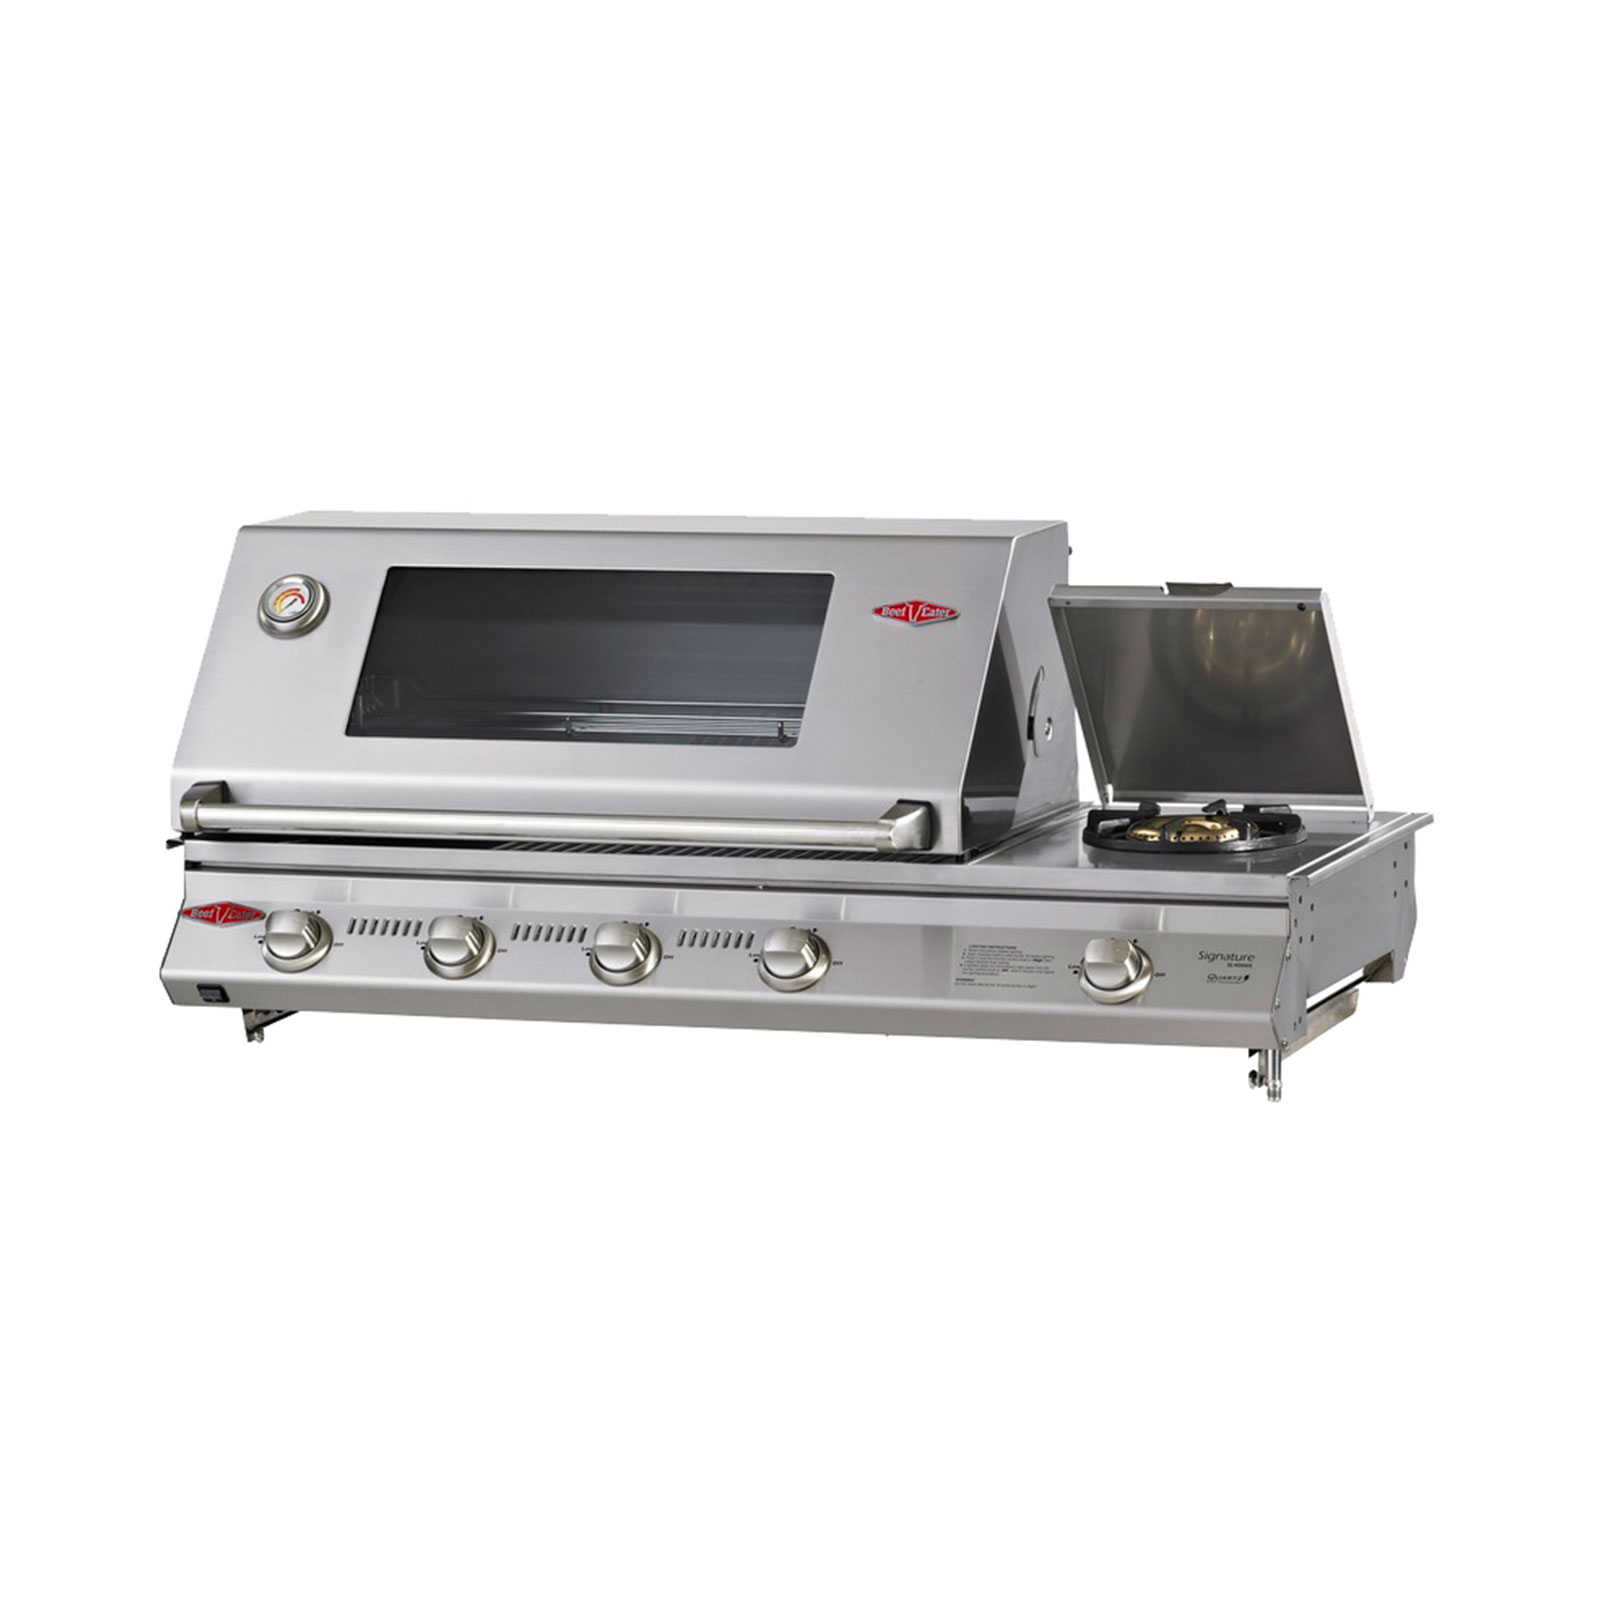 BeefEater Signature SL4000 4 Burner Built In Barbeque